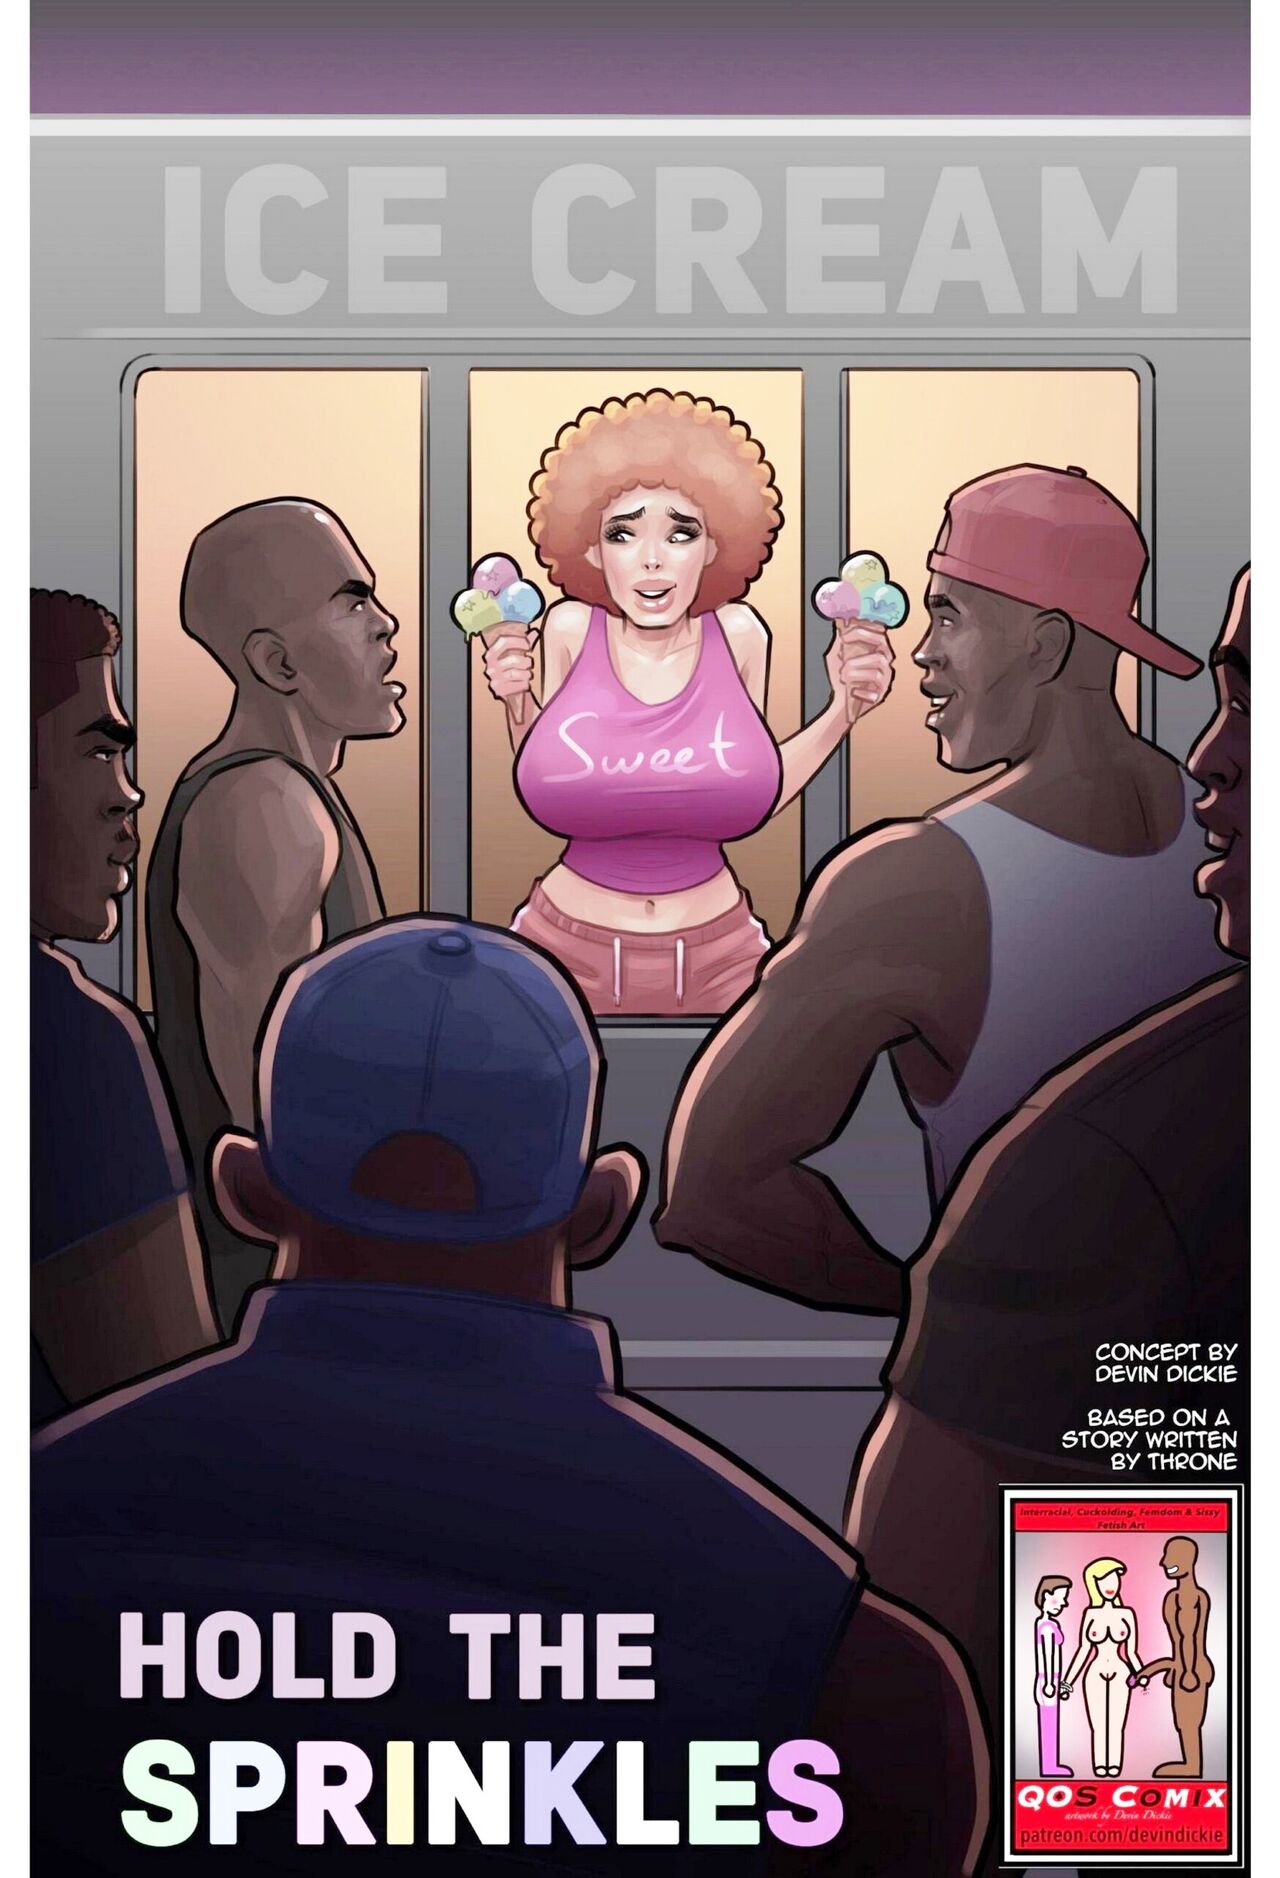 Devin Dickie - Hold The Sprinkles Porn Comics by [Devin Dickie] (Porn Comic)  Rule 34 Comics â€“ R34Porn